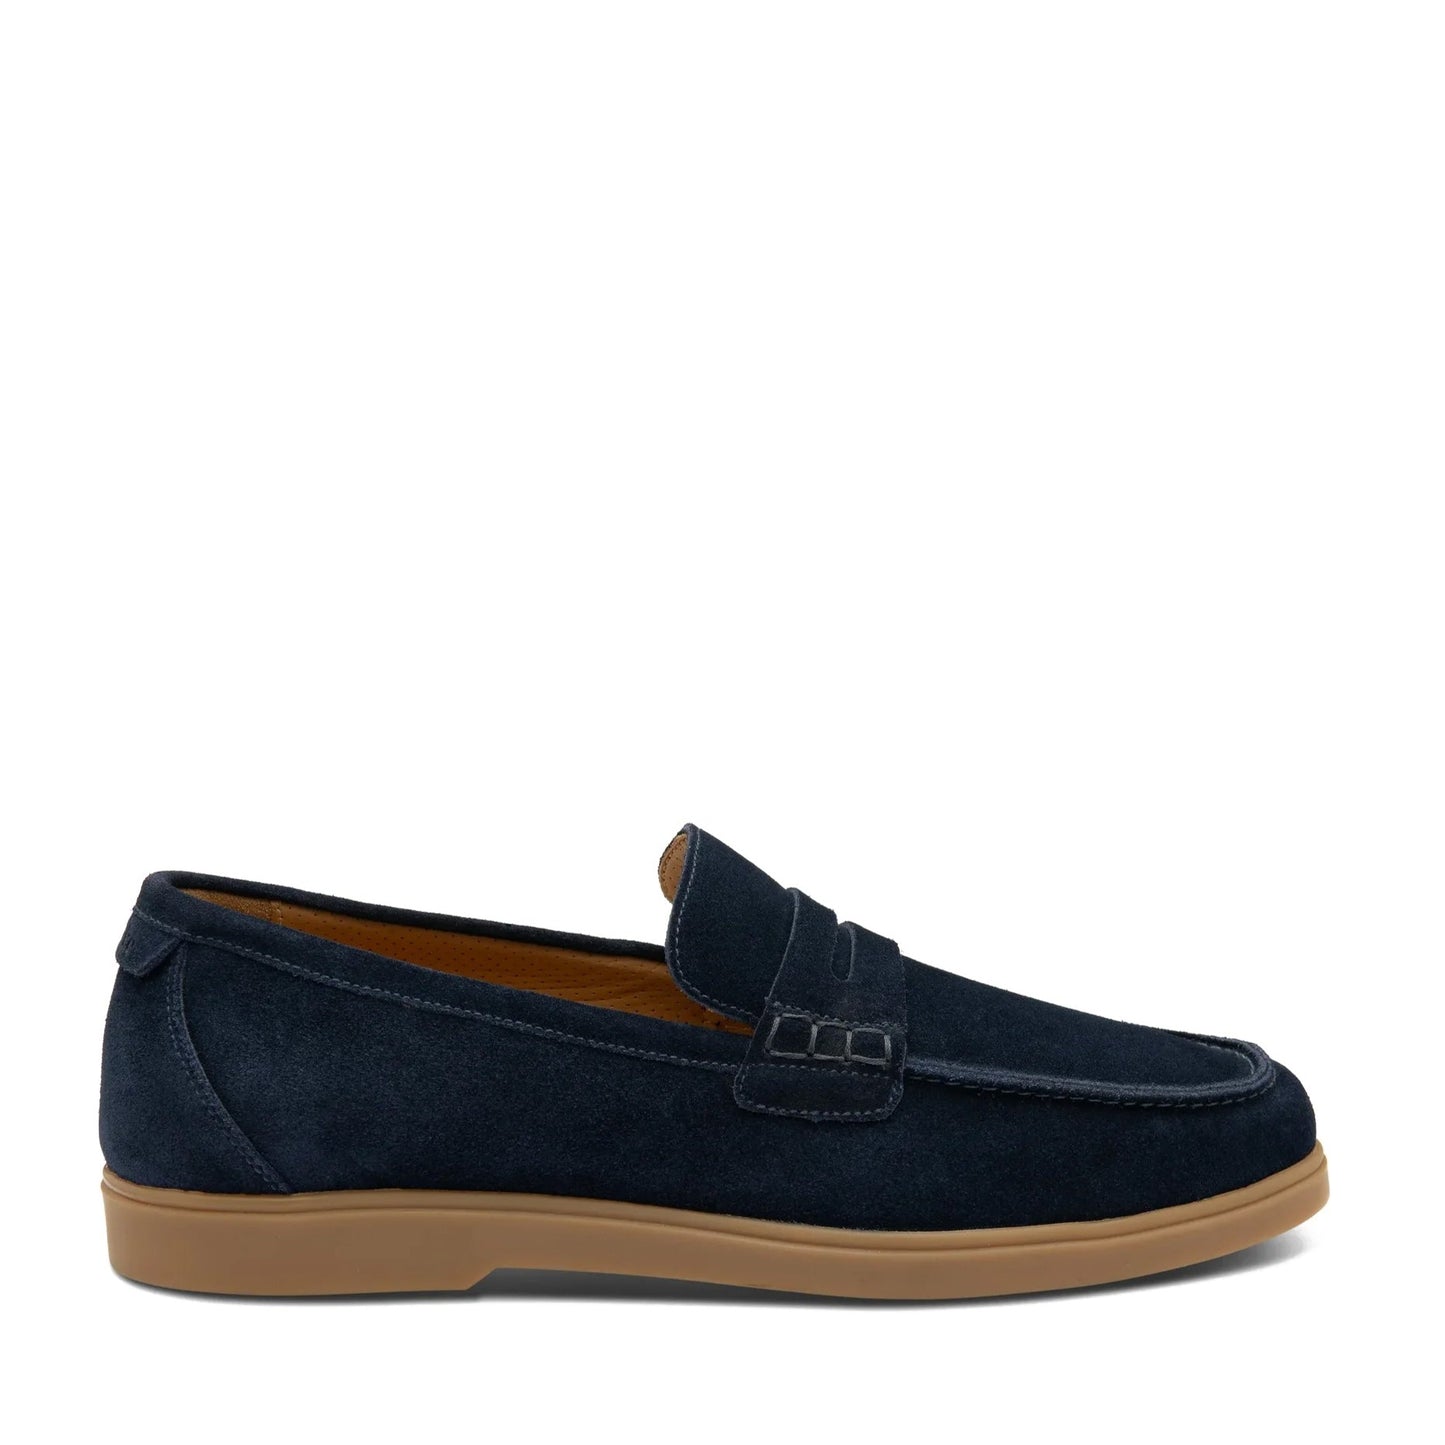 Loake Lucca Loafer - Navy Suede